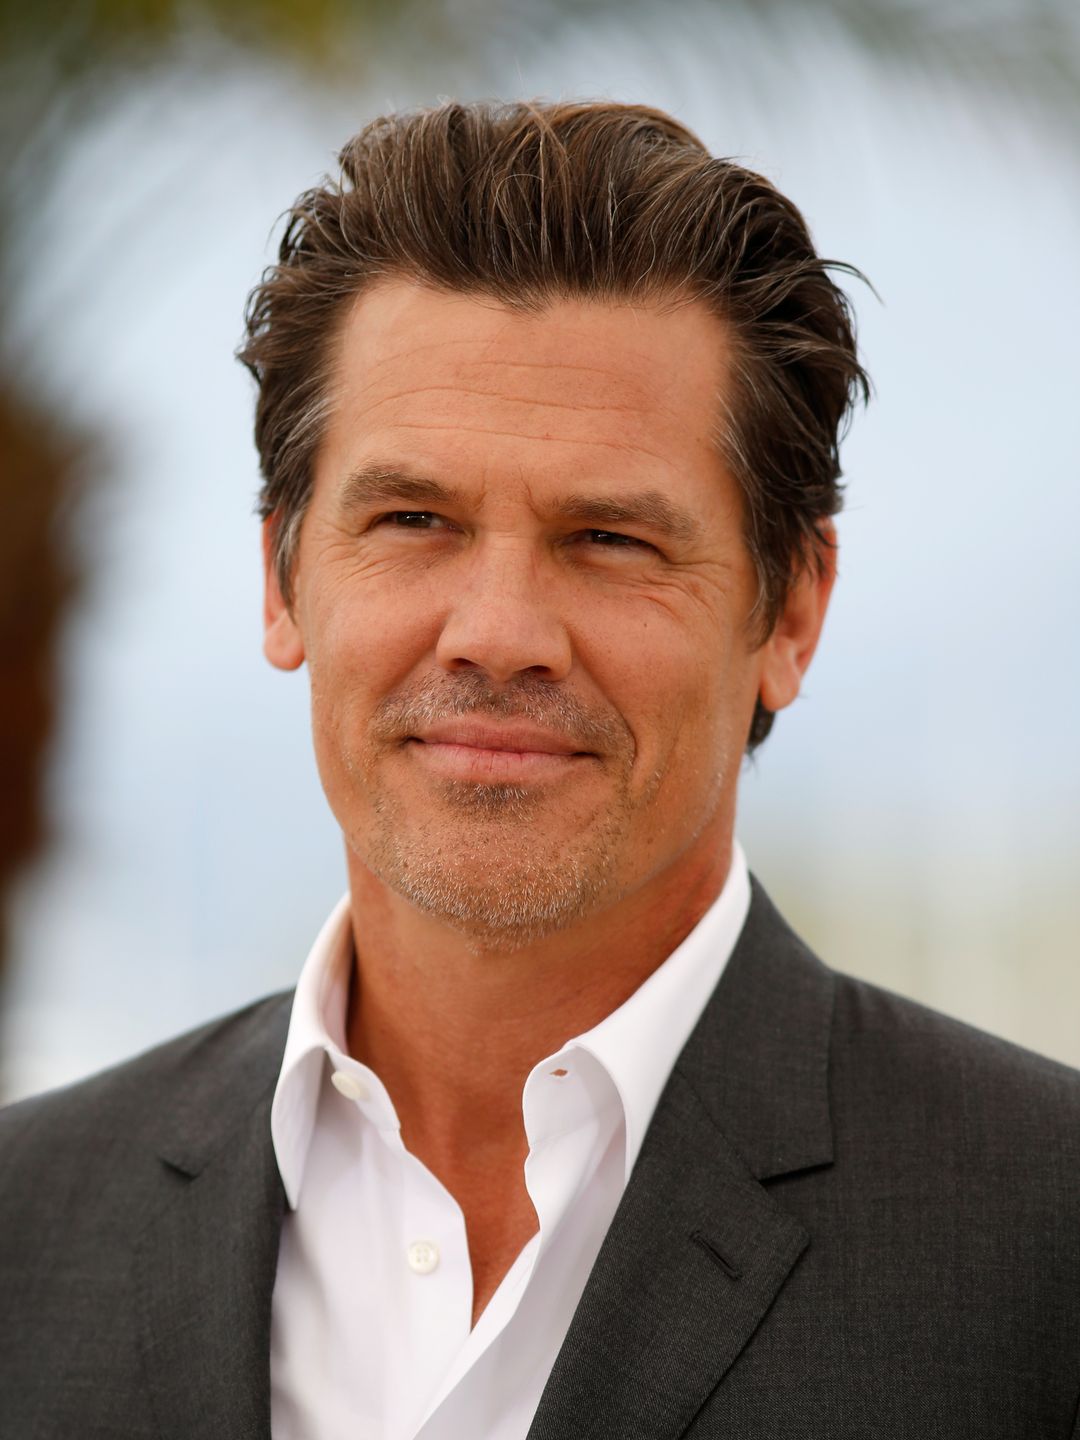 Josh Brolin who is his mother